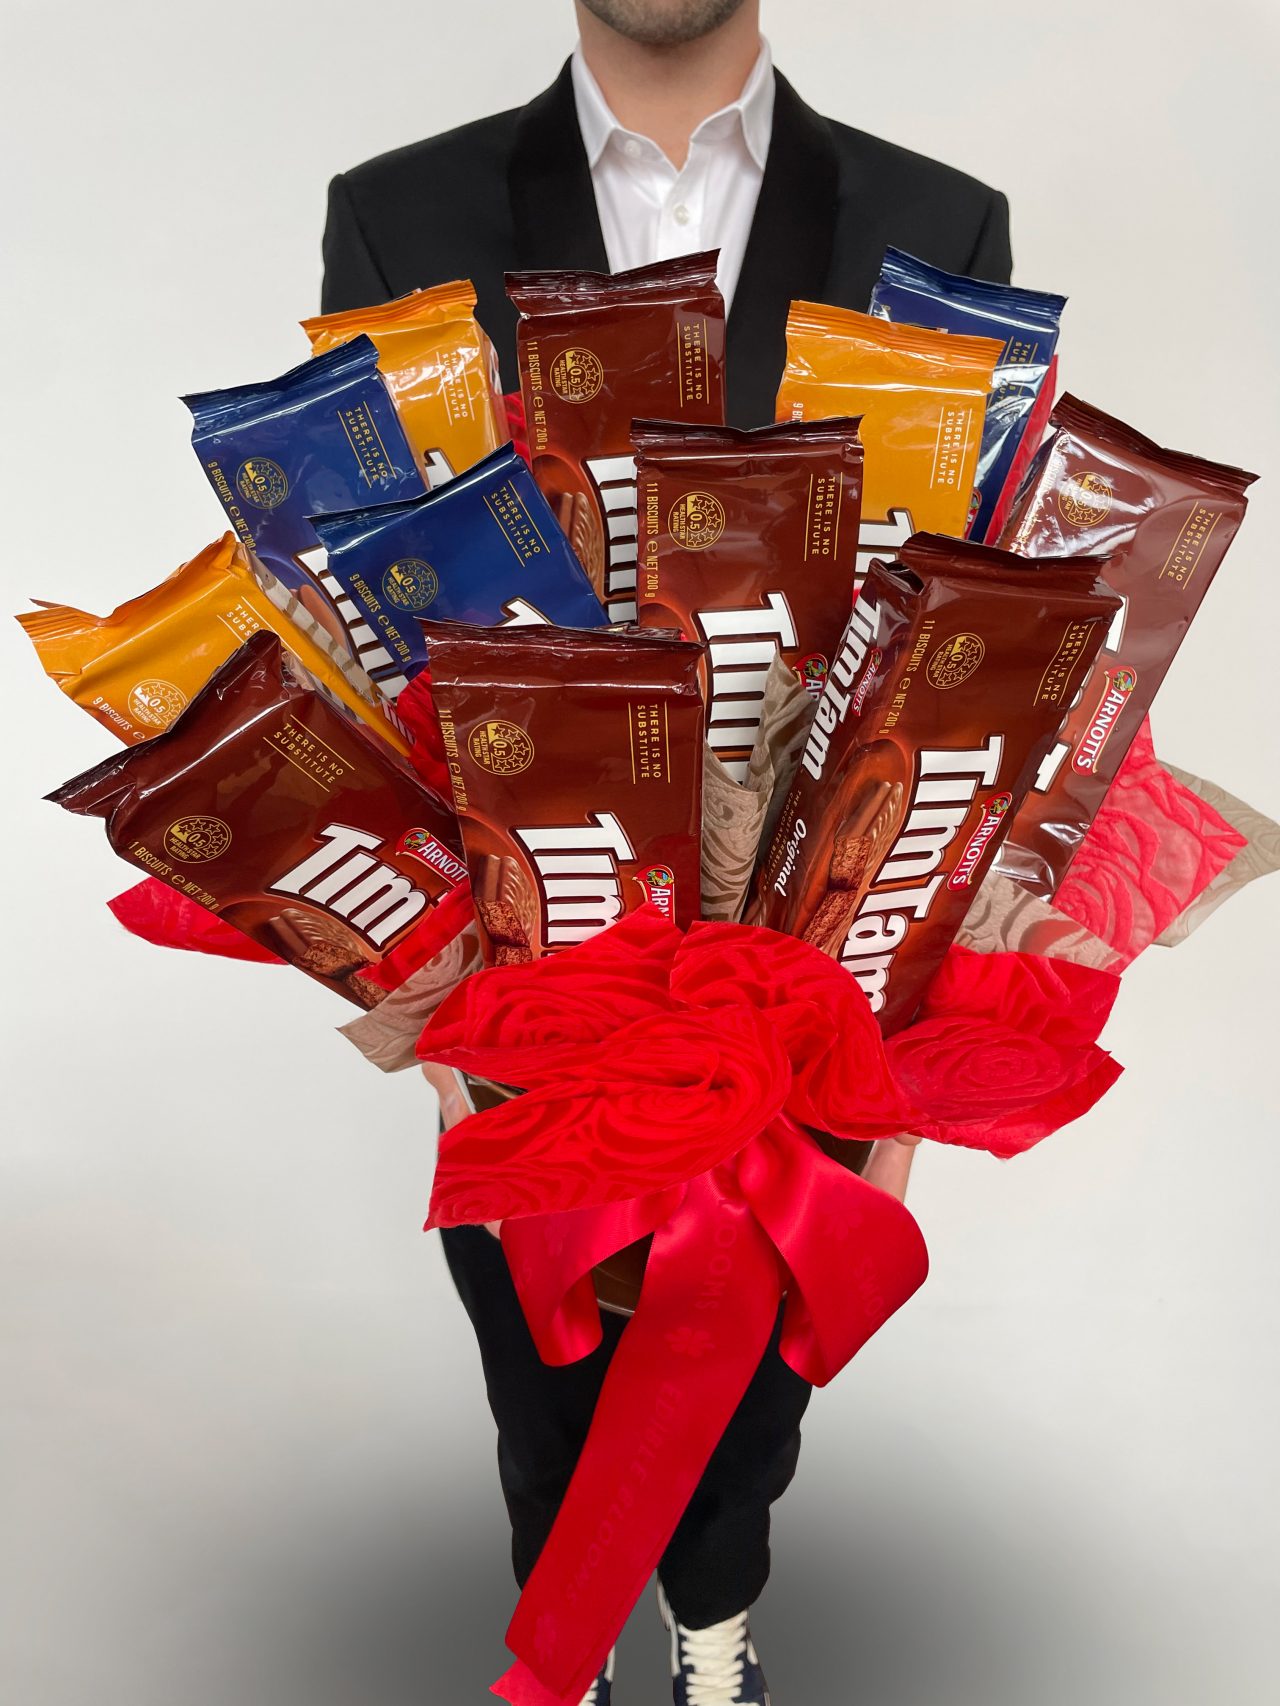 You can now buy a bouquet of Tim Tams